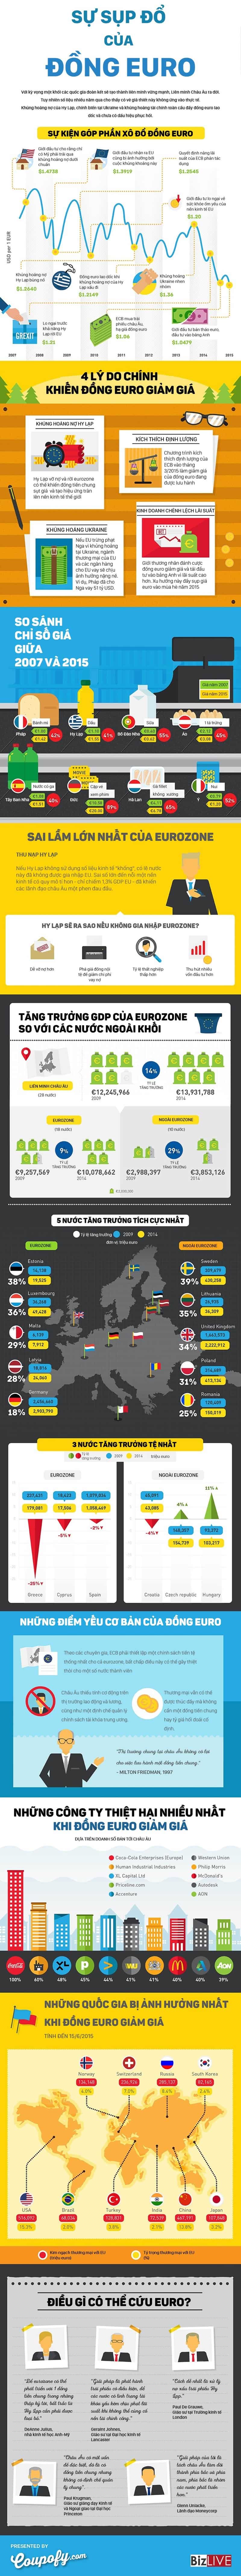 Infographic_Sup_Do_Dong_Euro